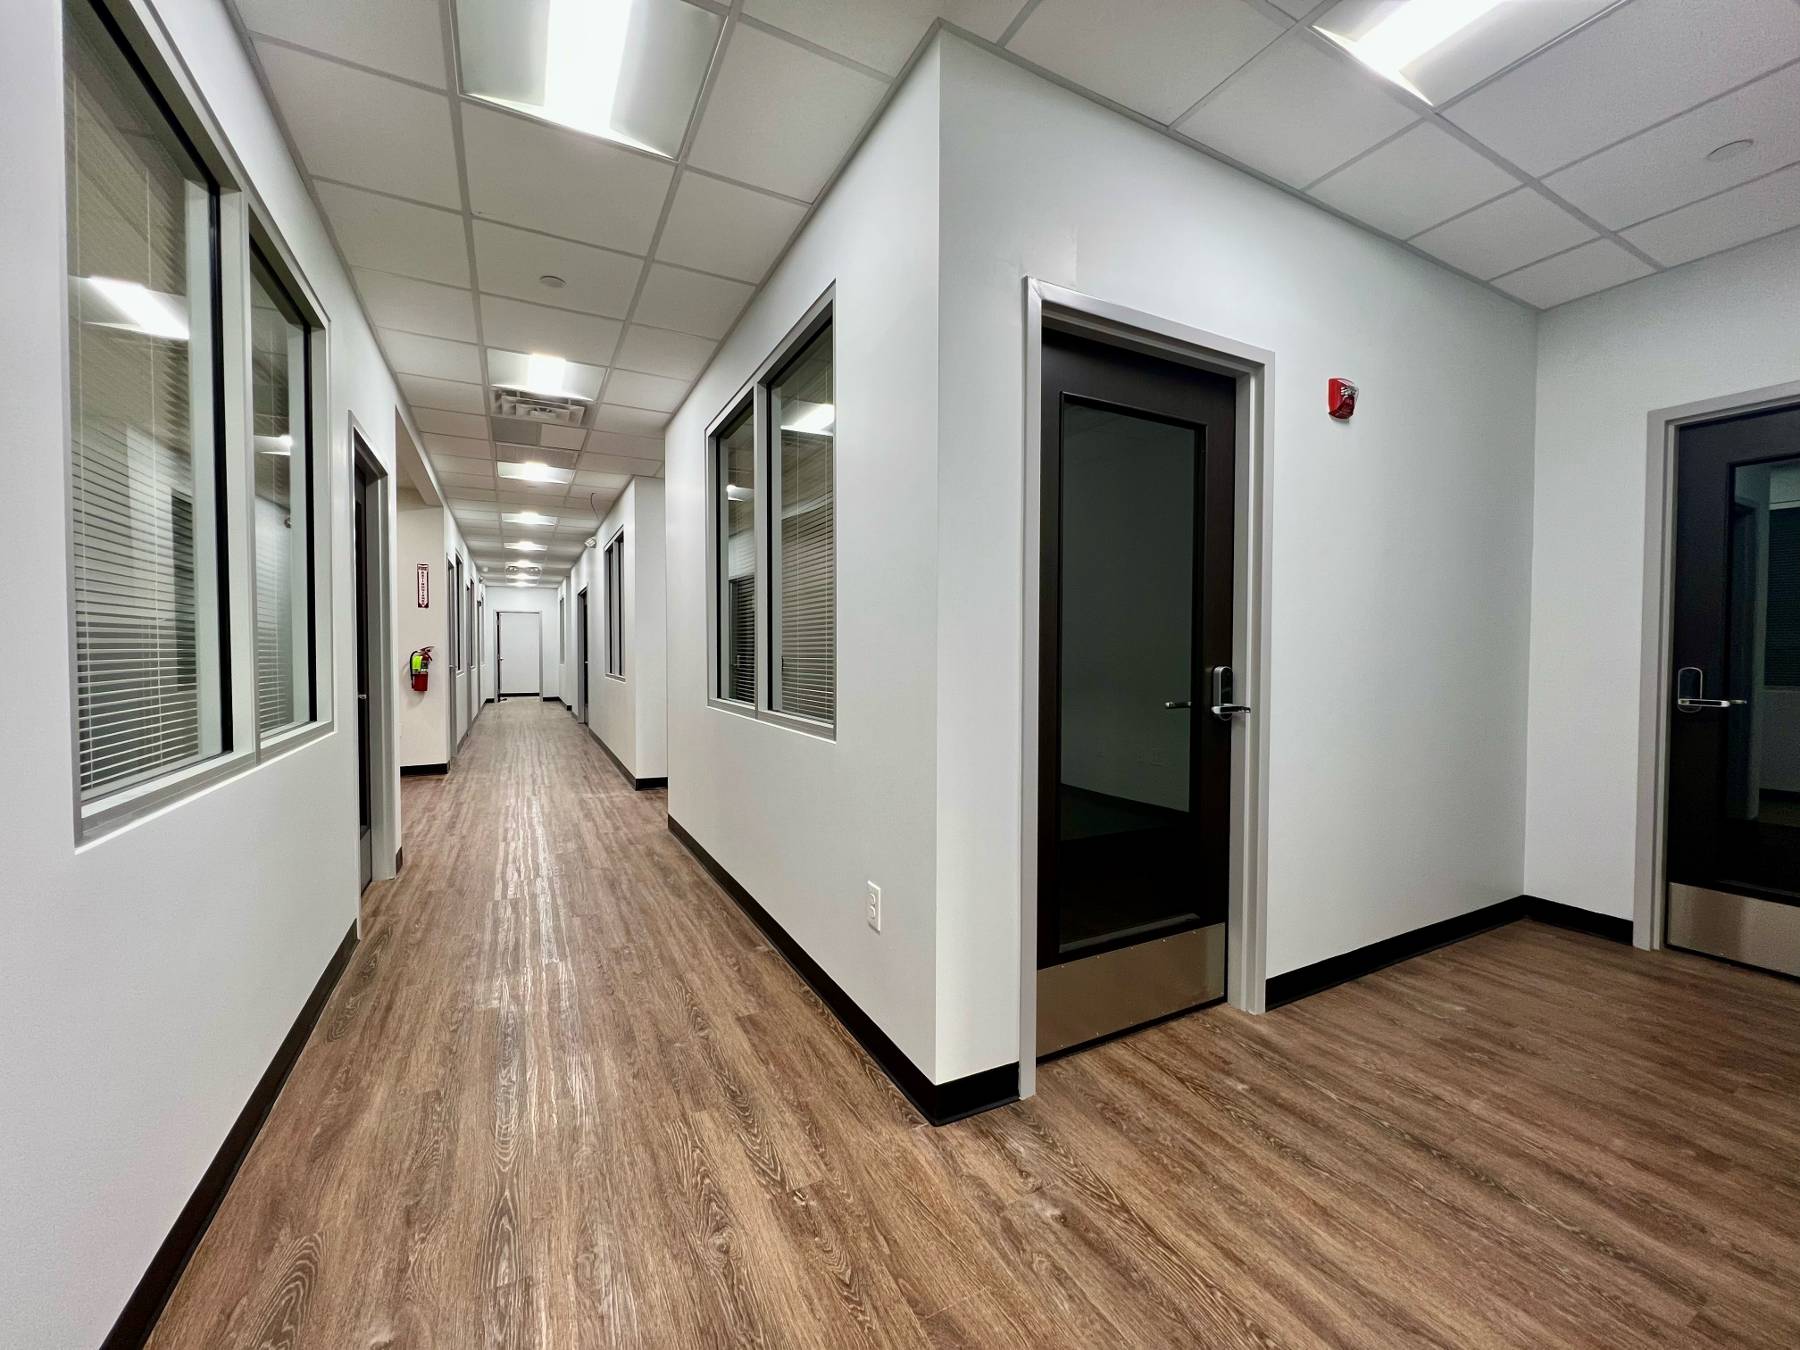 A long hallway with enclosed offices on both sides.